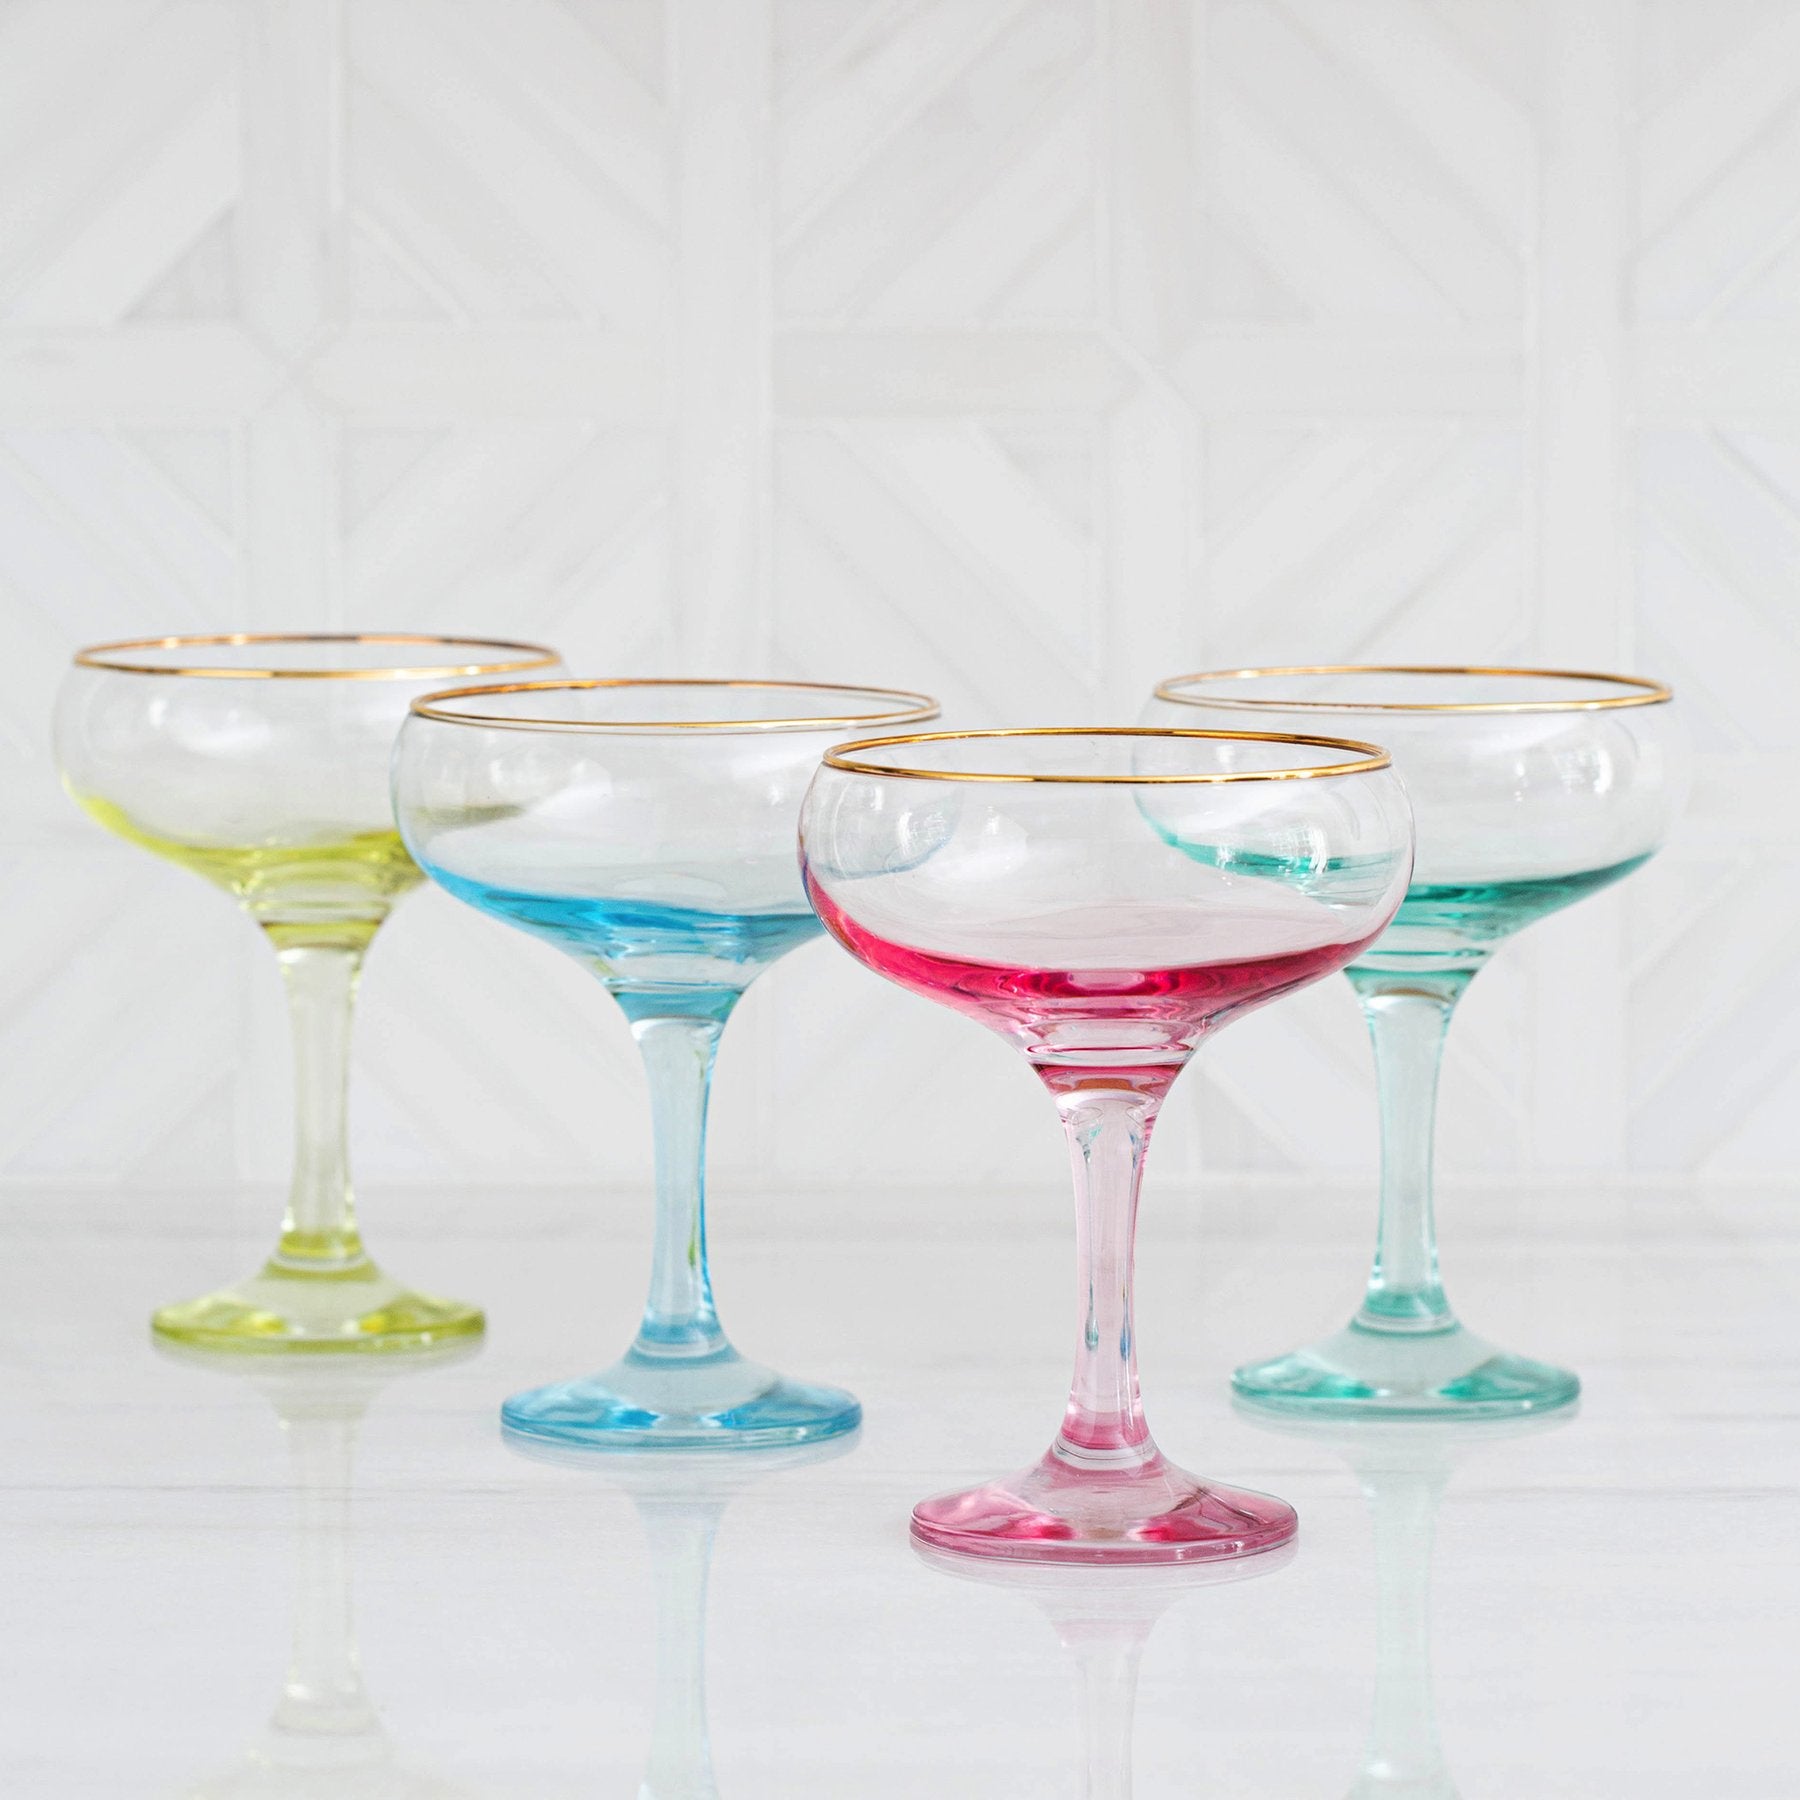 Rainbow Assorted Coupe Champagne Glasses - Set of 4